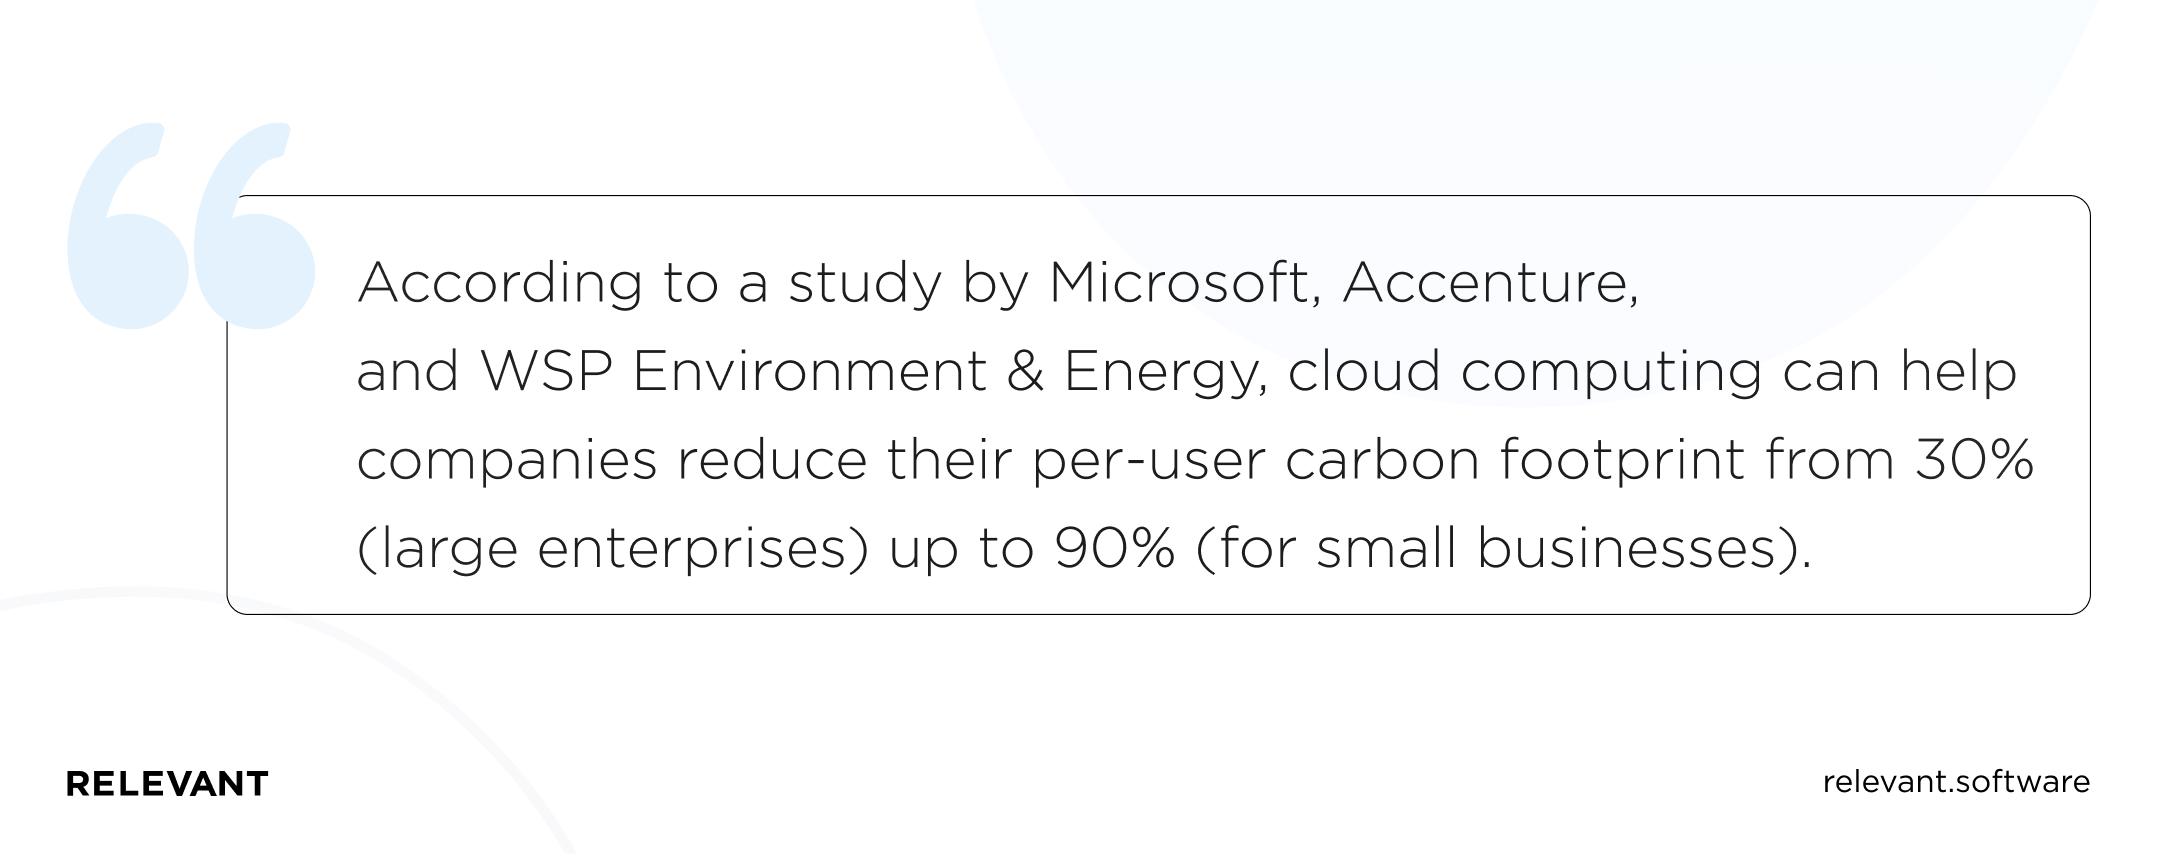 According to a study by Microsoft, Accenture, and WSP Environment & Energy, cloud computing can help companies reduce their per-user carbon footprint from 30% (large enterprises) up to 90% (for small businesses).